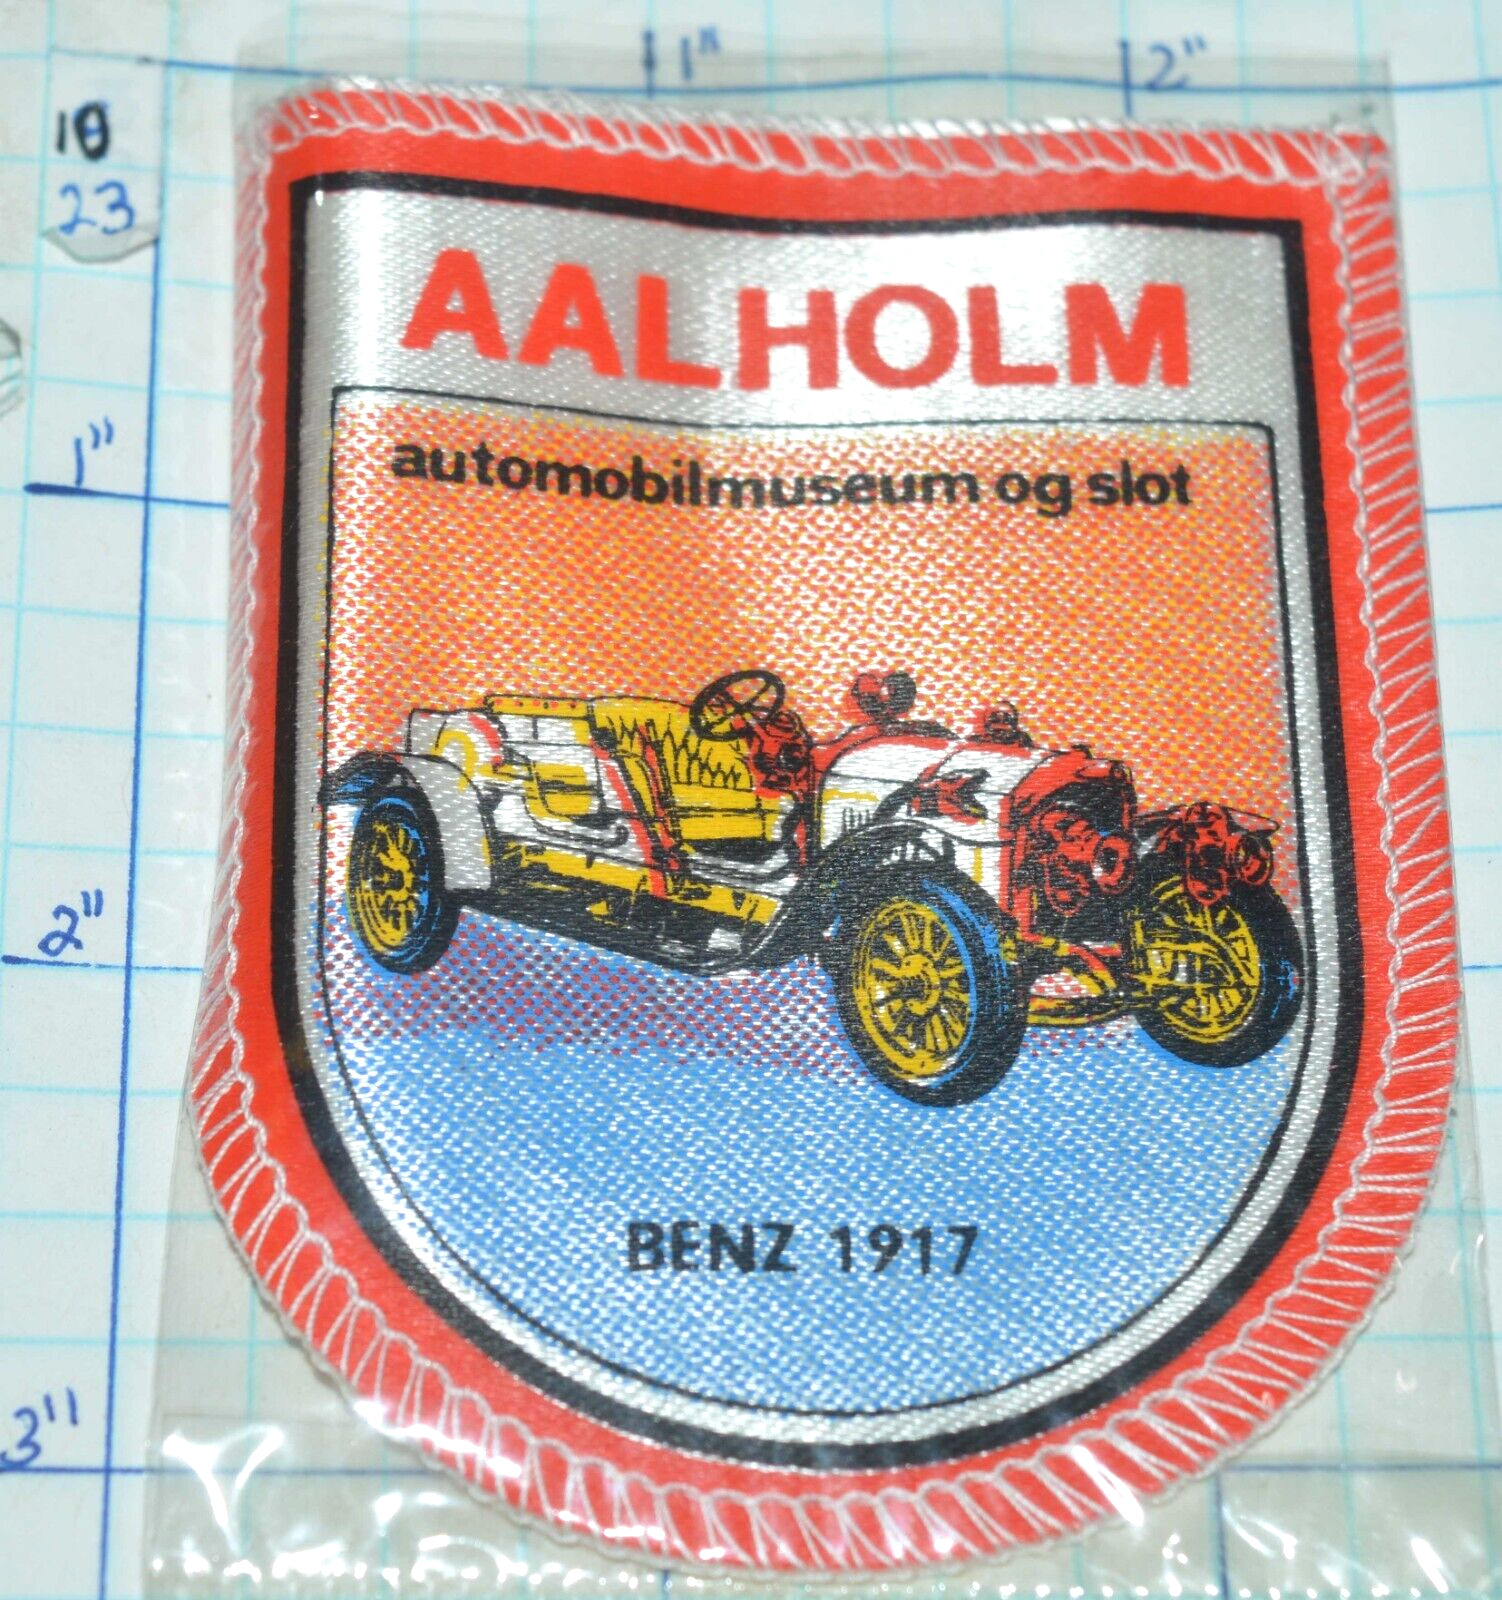 DENMARK, AALHOLM AUTO MUSEUM CLOSED 2008 BENZ 1917 VINTAGE NIP PATCH